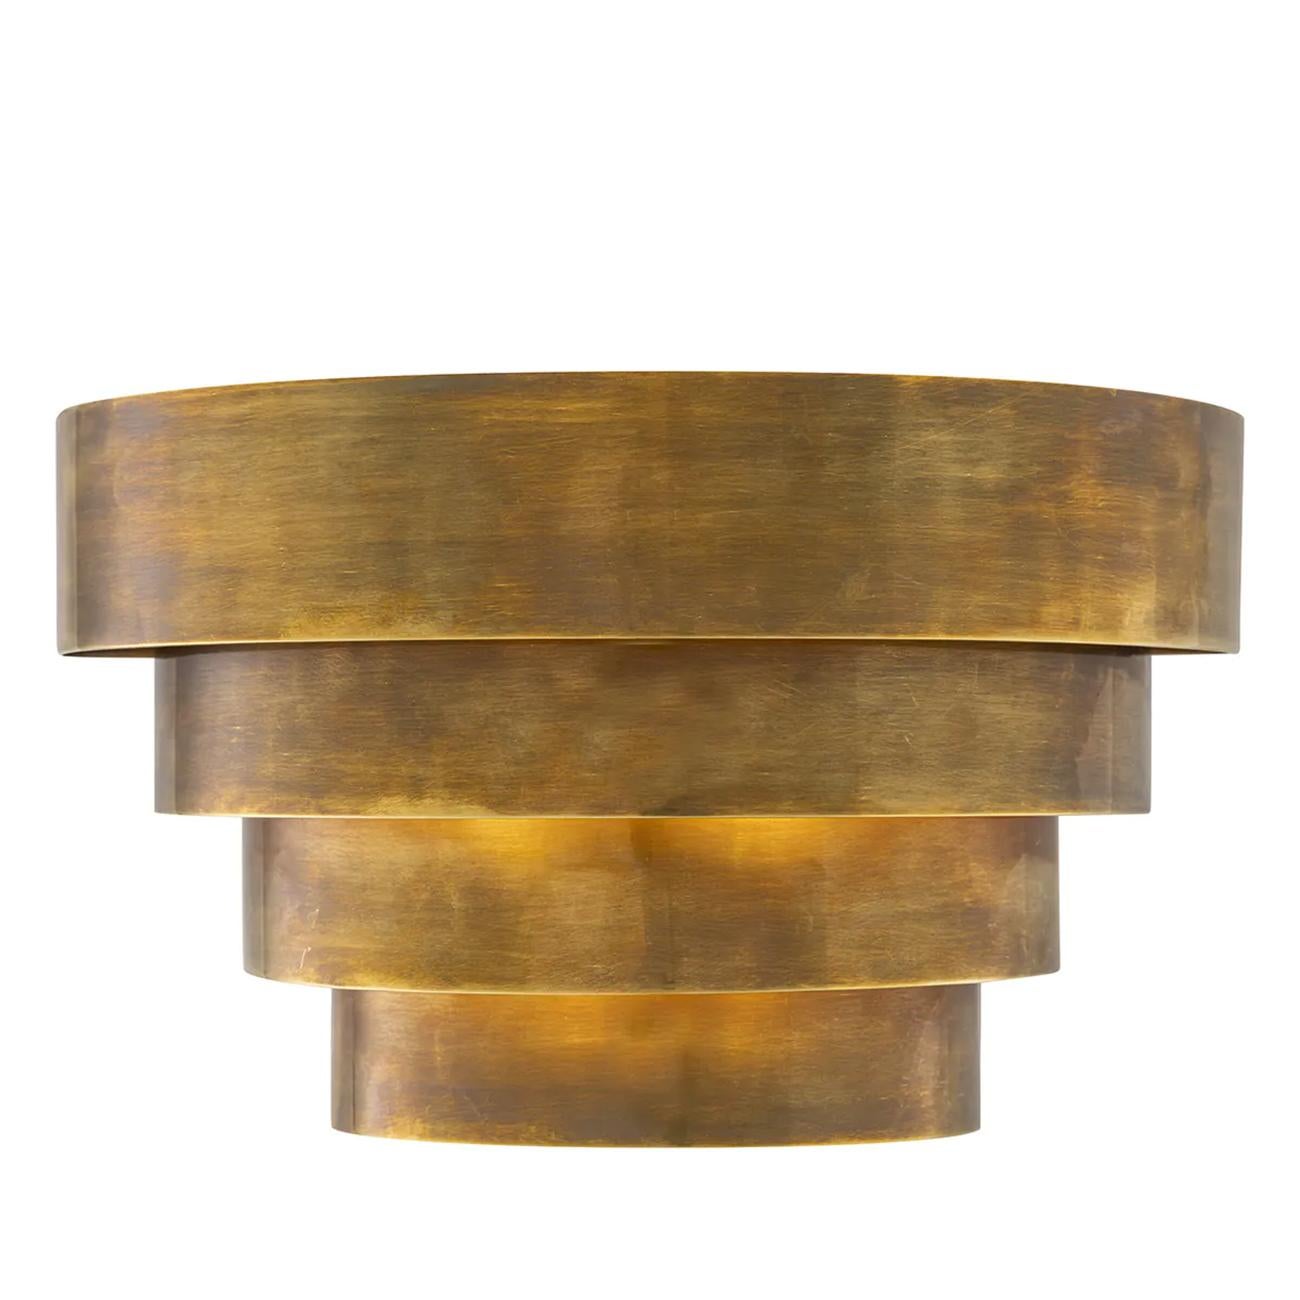 Wall Lamp Ellias Large with all structure in solid brass,
2 bulbs, lamp holder type E14, max 25 watt, bulbs not included.